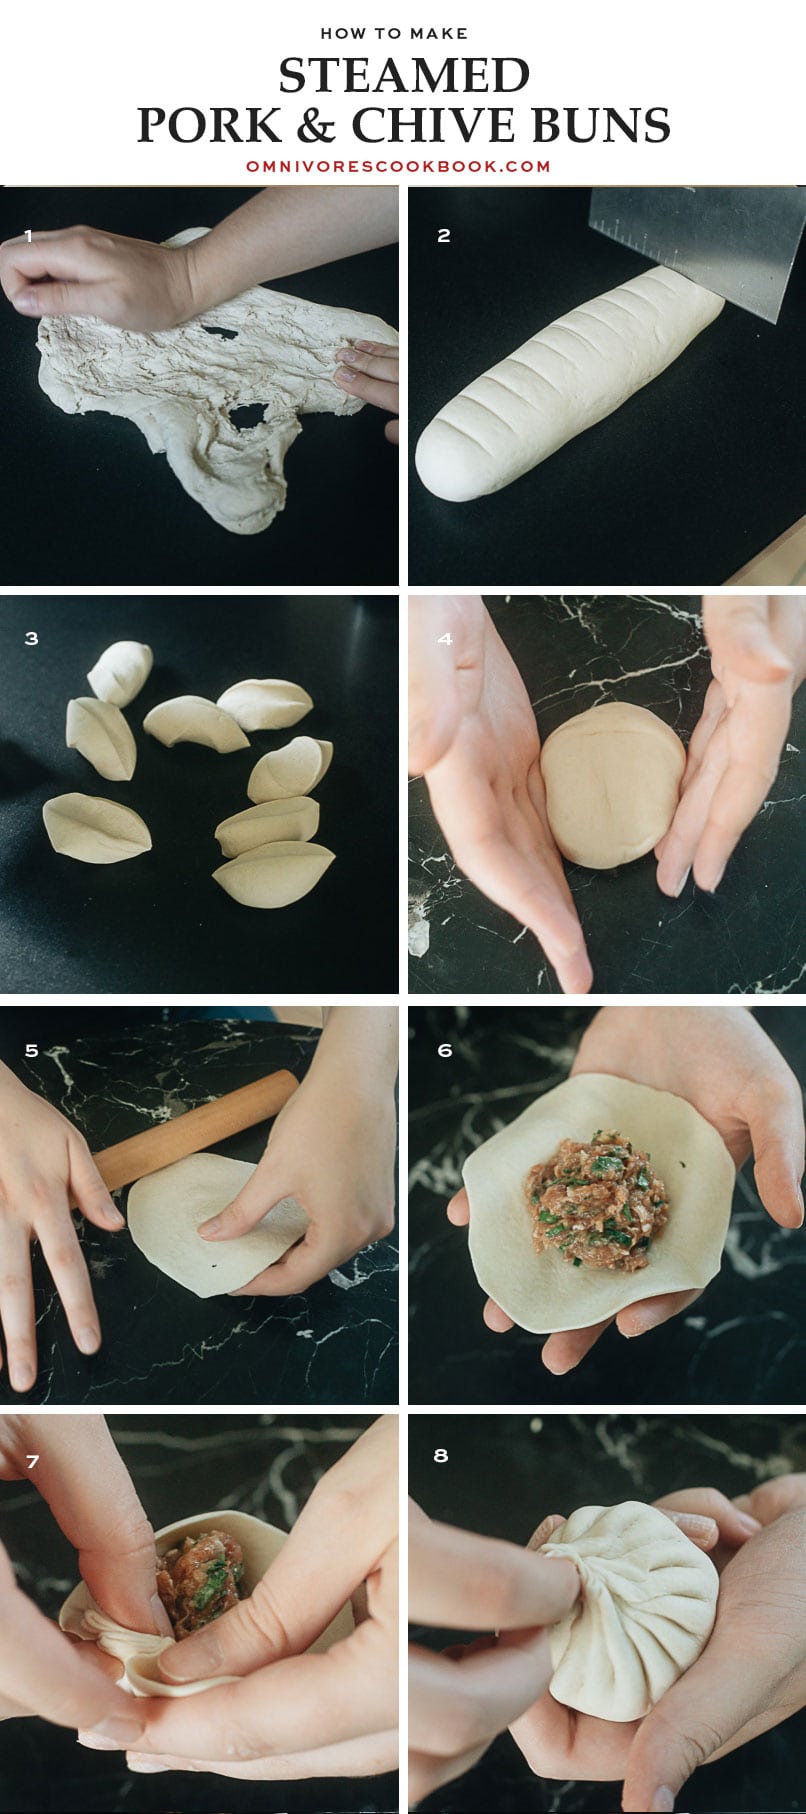 How to make steamed pork and chive buns by hand